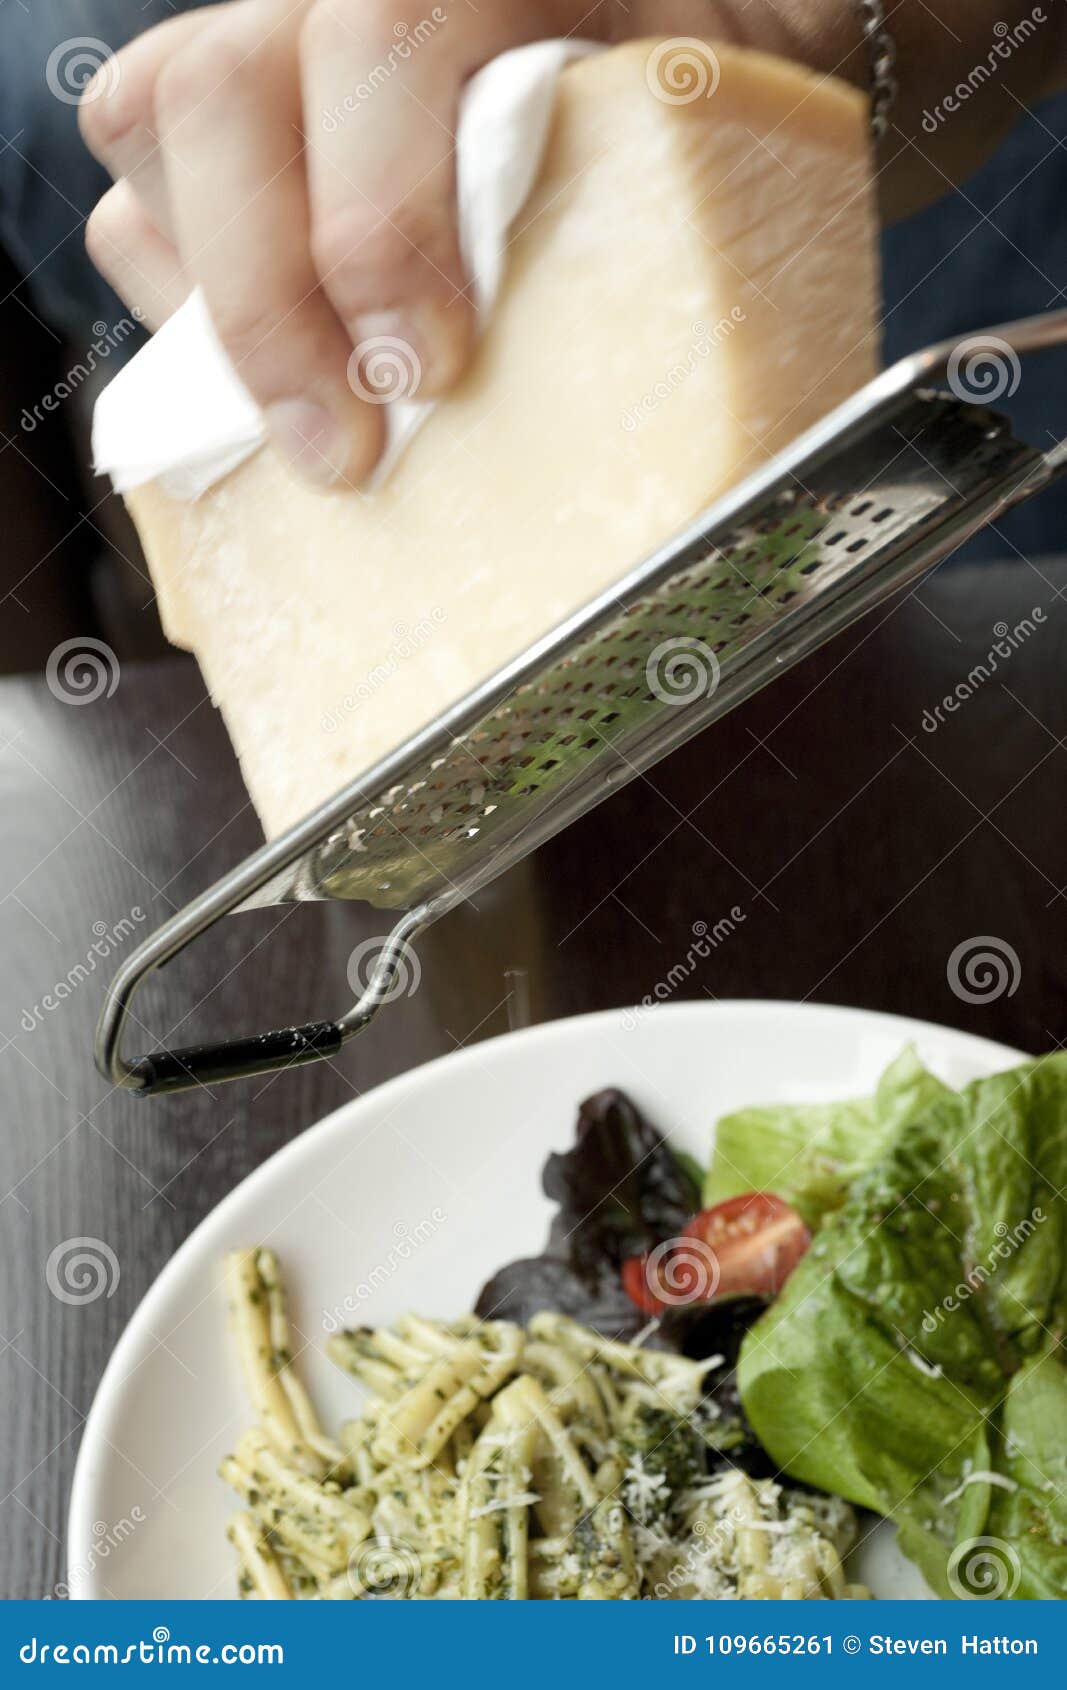 https://thumbs.dreamstime.com/z/parmesan-being-shaved-cheese-grater-cafe-deli-setting-onto-pasta-salad-dish-parmesan-being-shaved-cheese-109665261.jpg